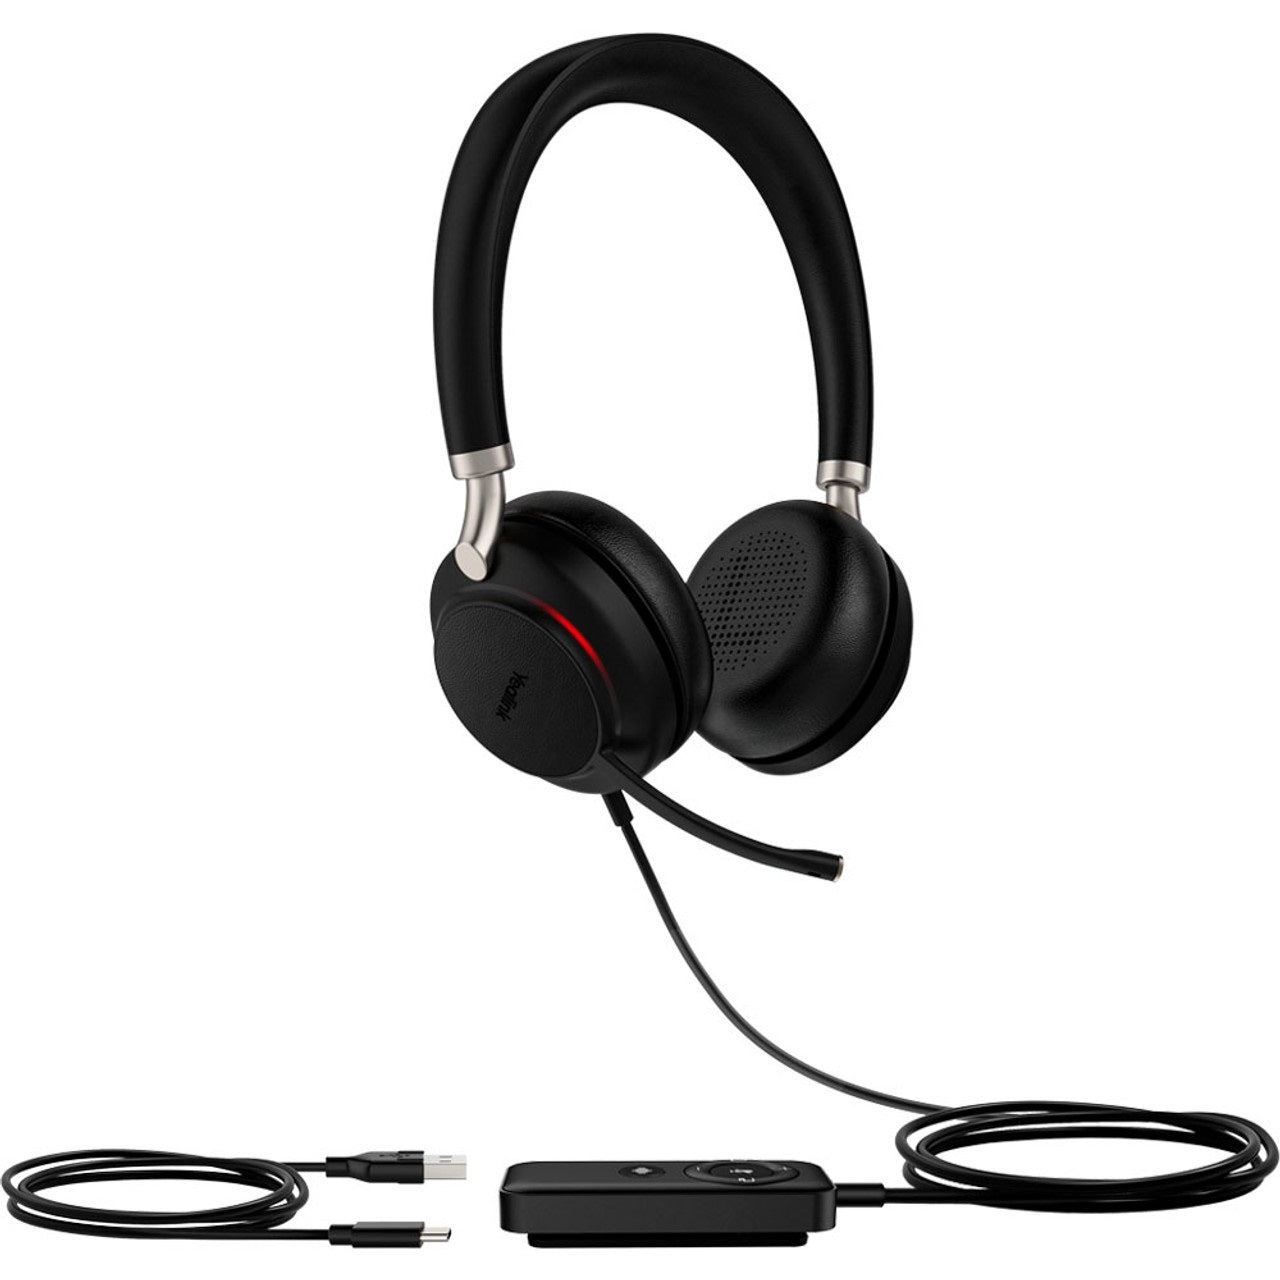 Yealink-UH38-Bluetooth-USB-Headset-Duo-Teams-Left-Side